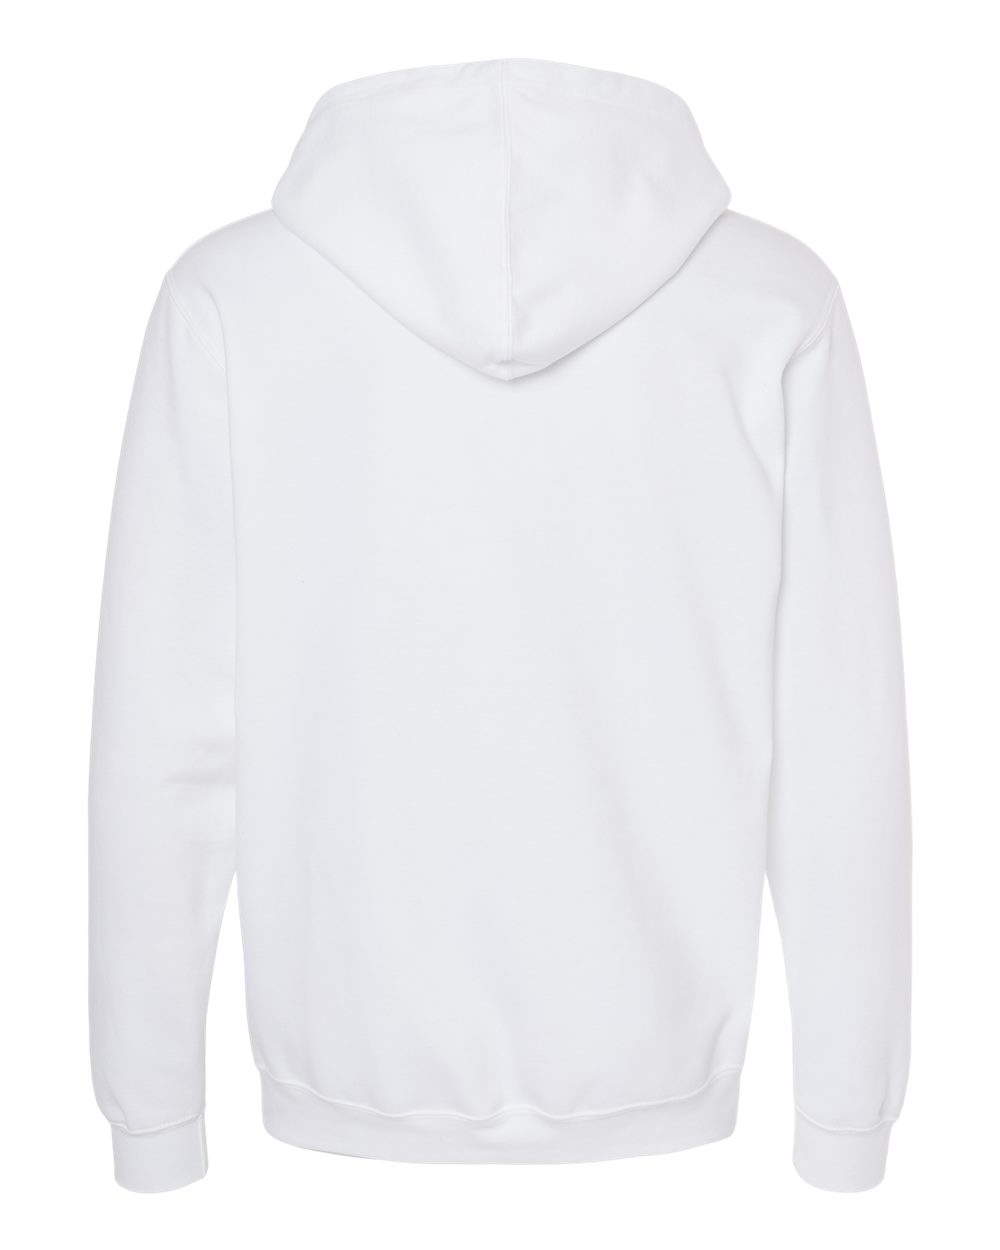 M&O 3320 - Unisex Pullover Hoodie